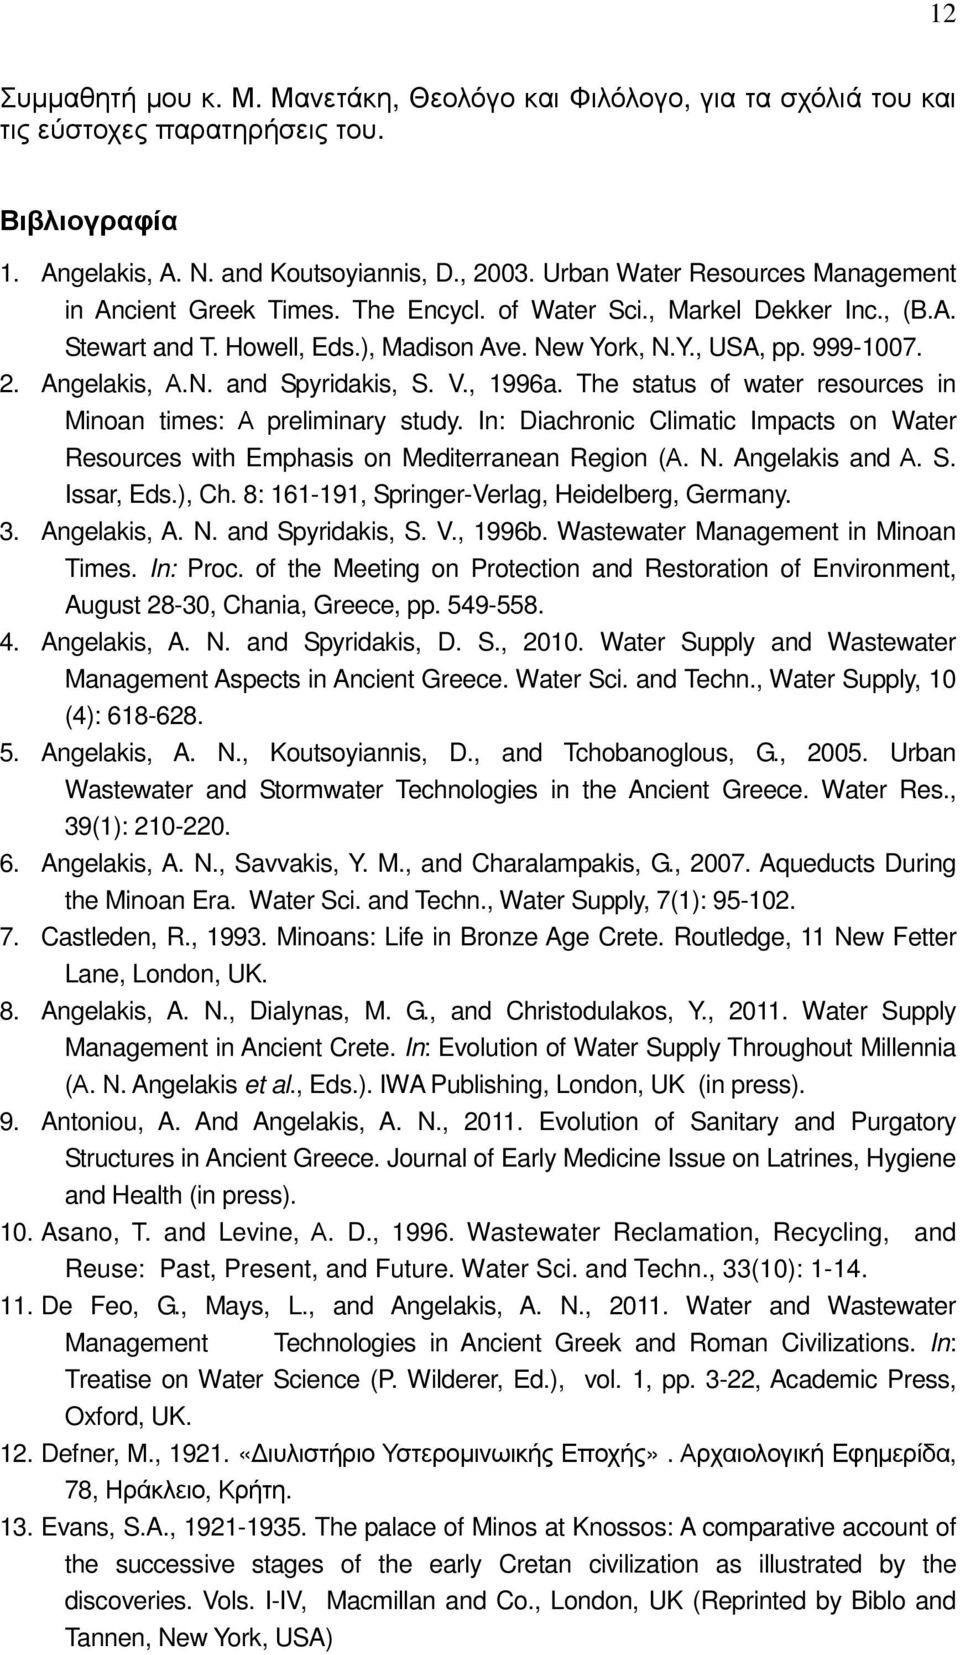 Angelakis, Α.Ν. and Spyridakis, S. V., 1996a. The status of water resources in Minoan times: Α preliminary study.